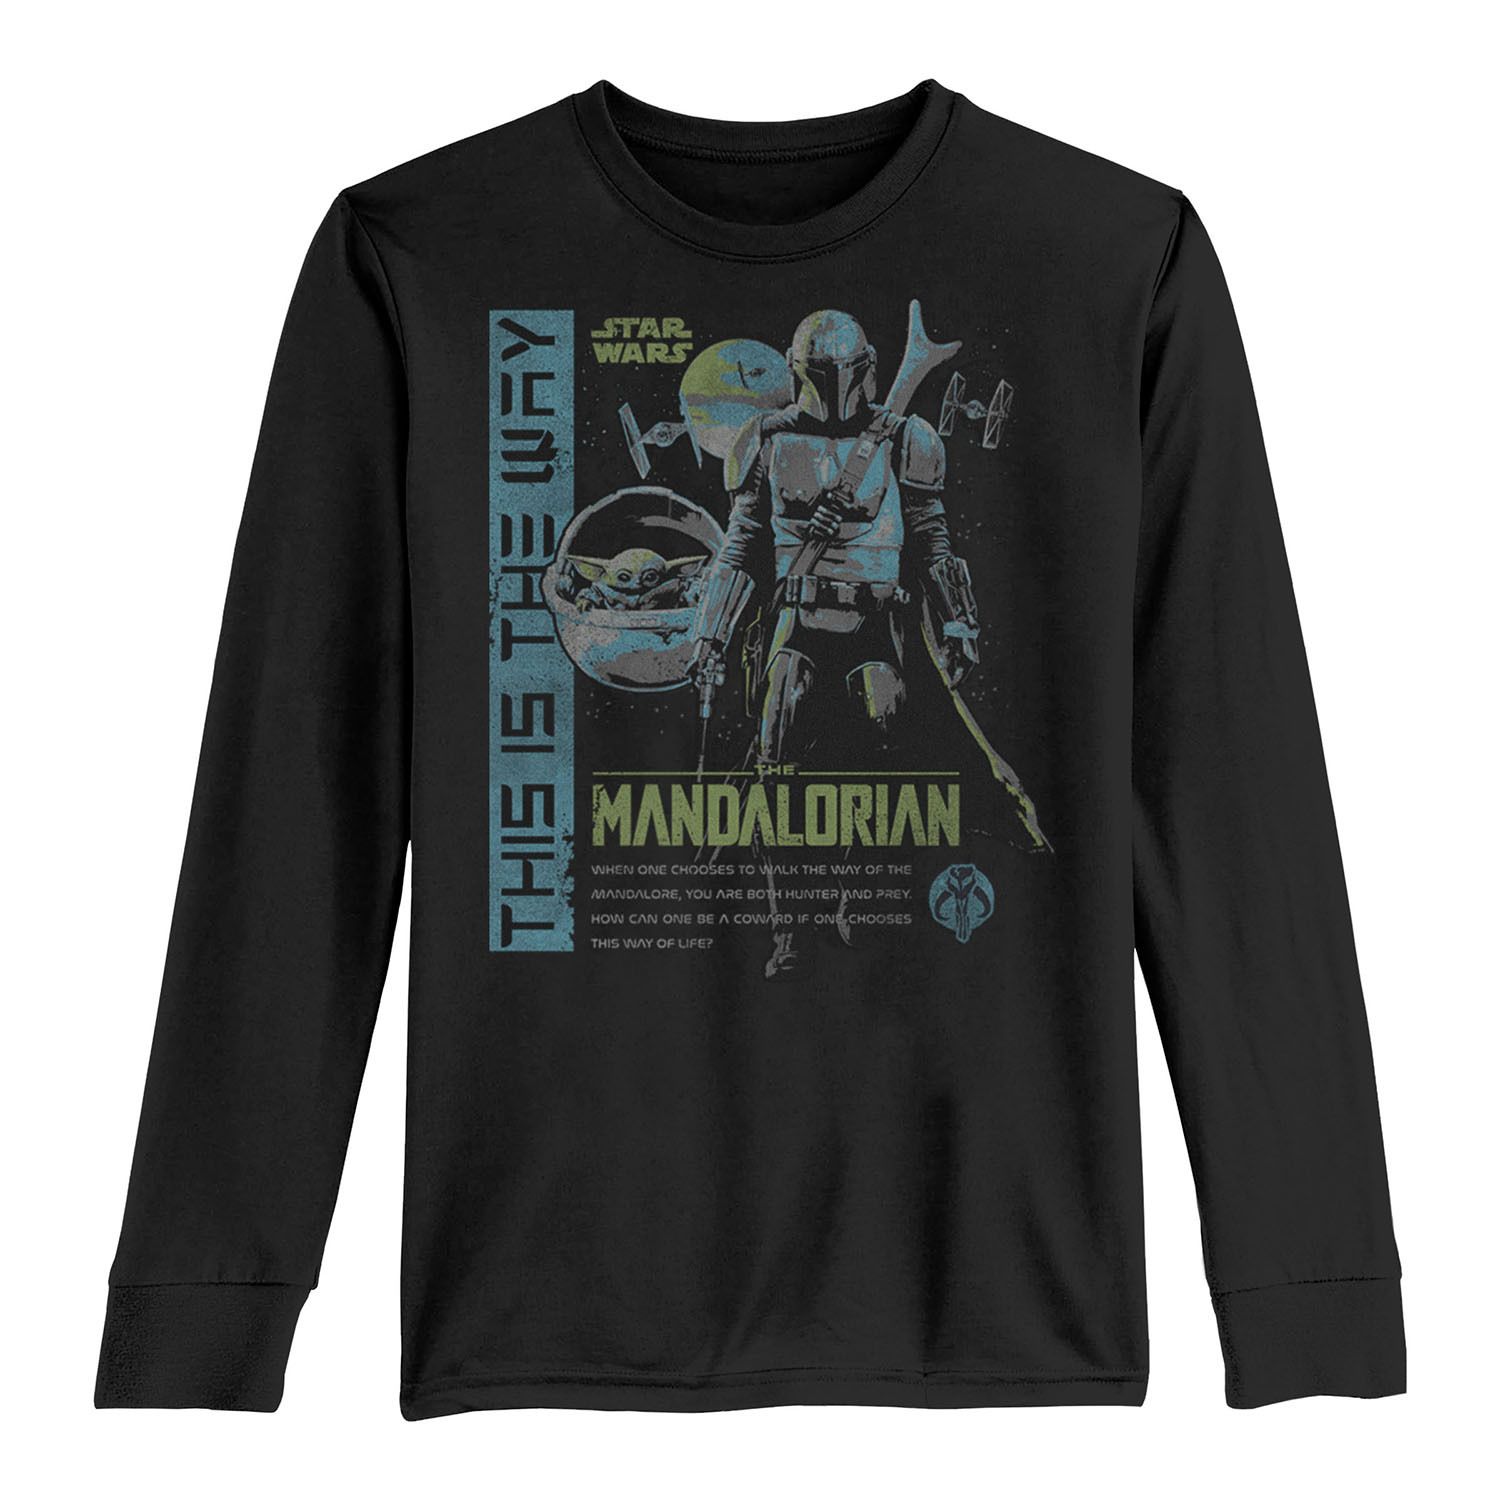 Image for Licensed Character Boys 8-20 Star Wars The Mandalorian "This Is The Way" Collage Tee at Kohl's.